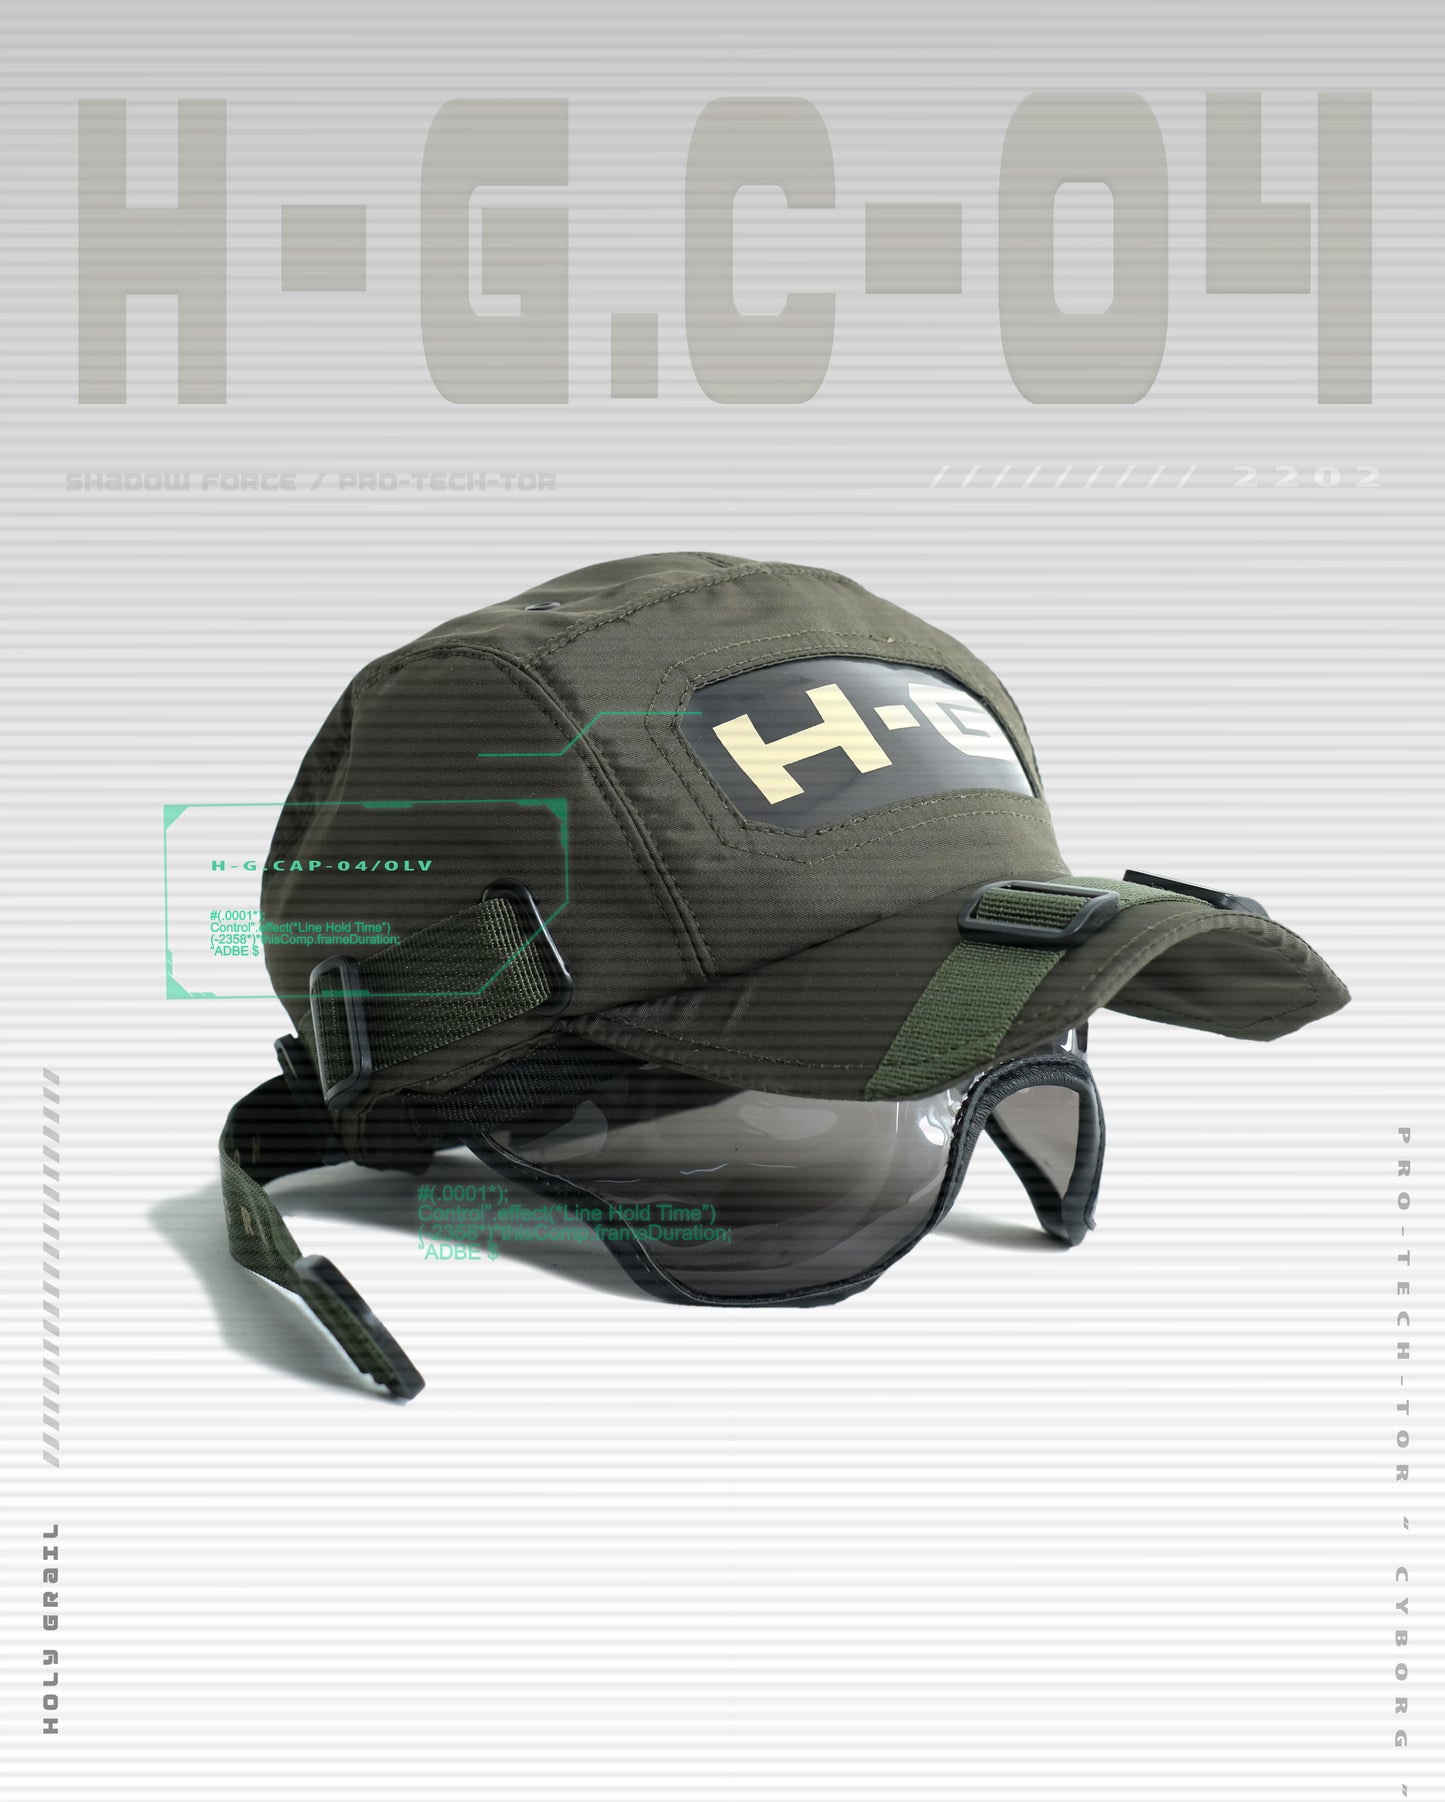 H-G.CAP-04/OLV ( LIMITED EDITION!)